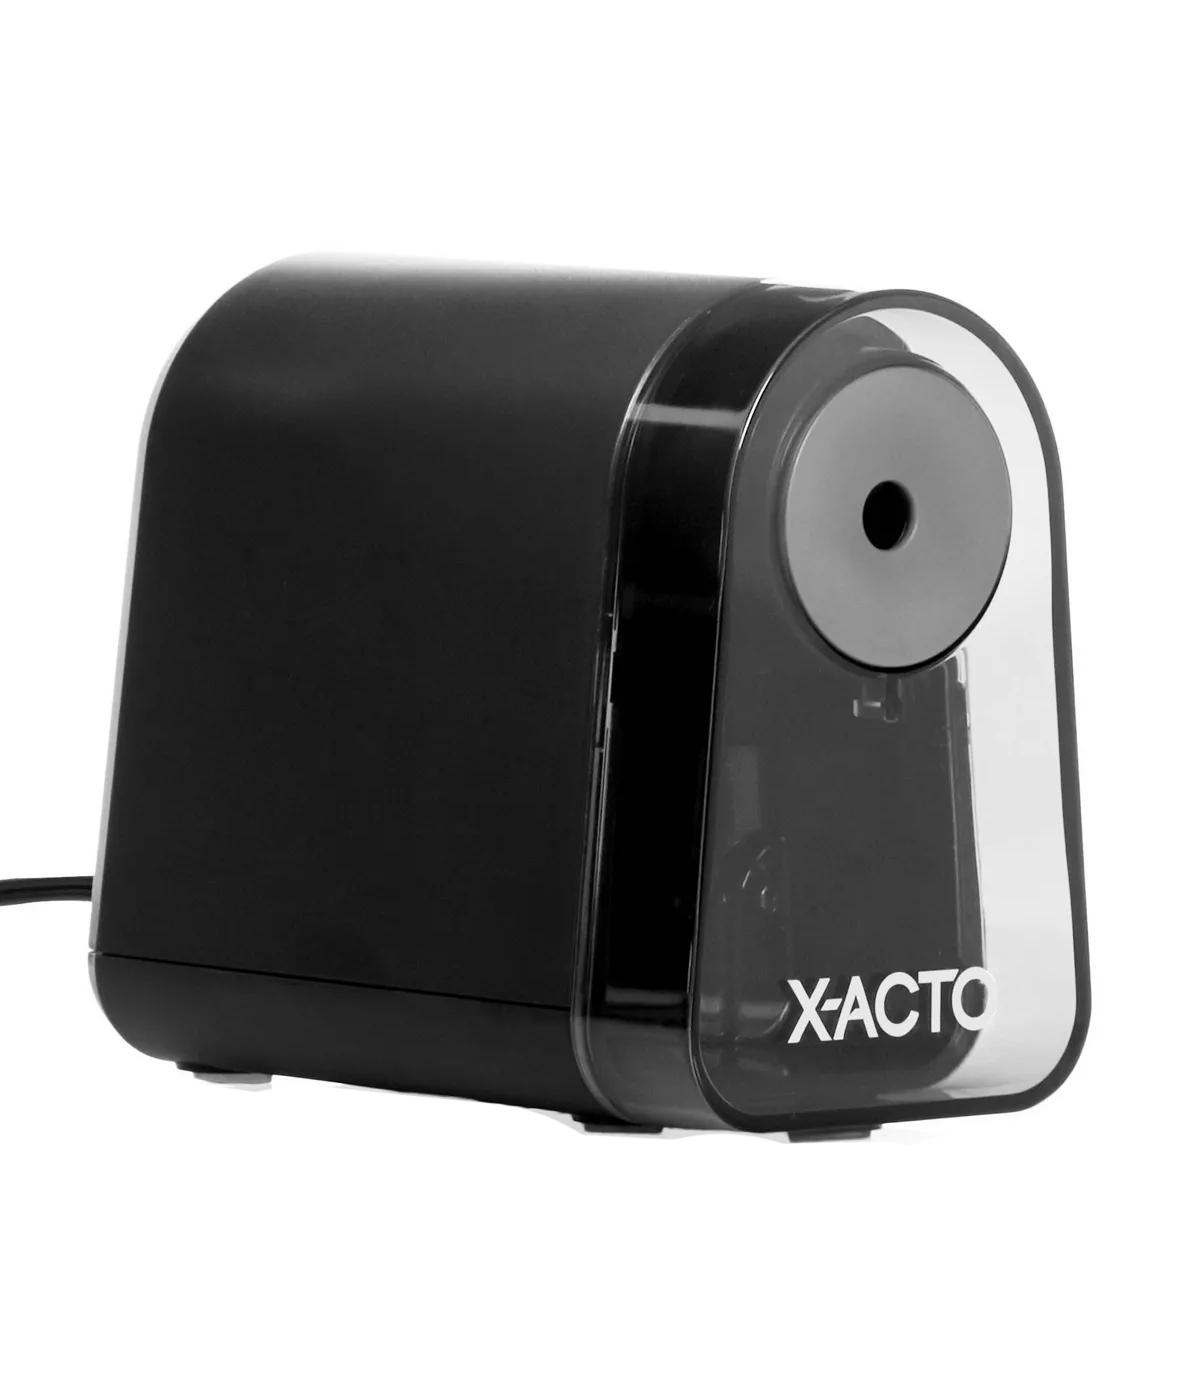 X-ACTO Mighty Mite Electric Pencil Sharpener; image 1 of 2